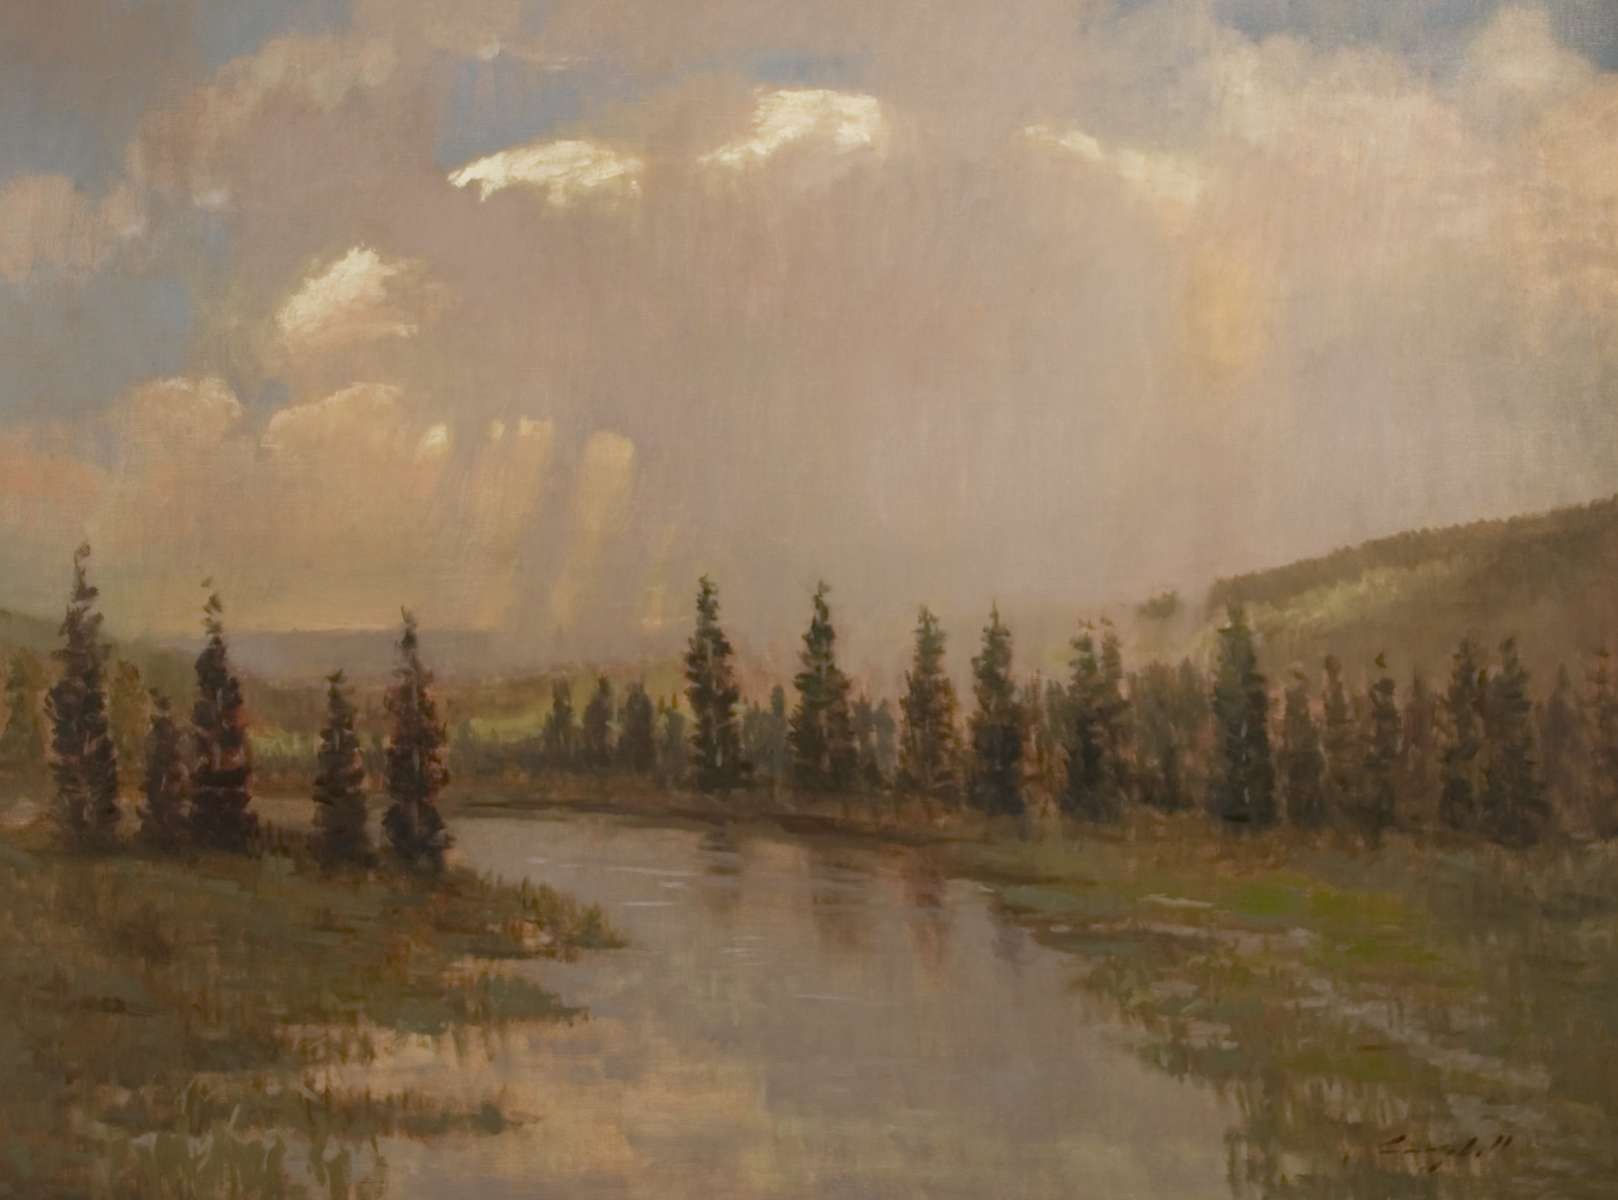 Snake River painting by artist Peter Campbel